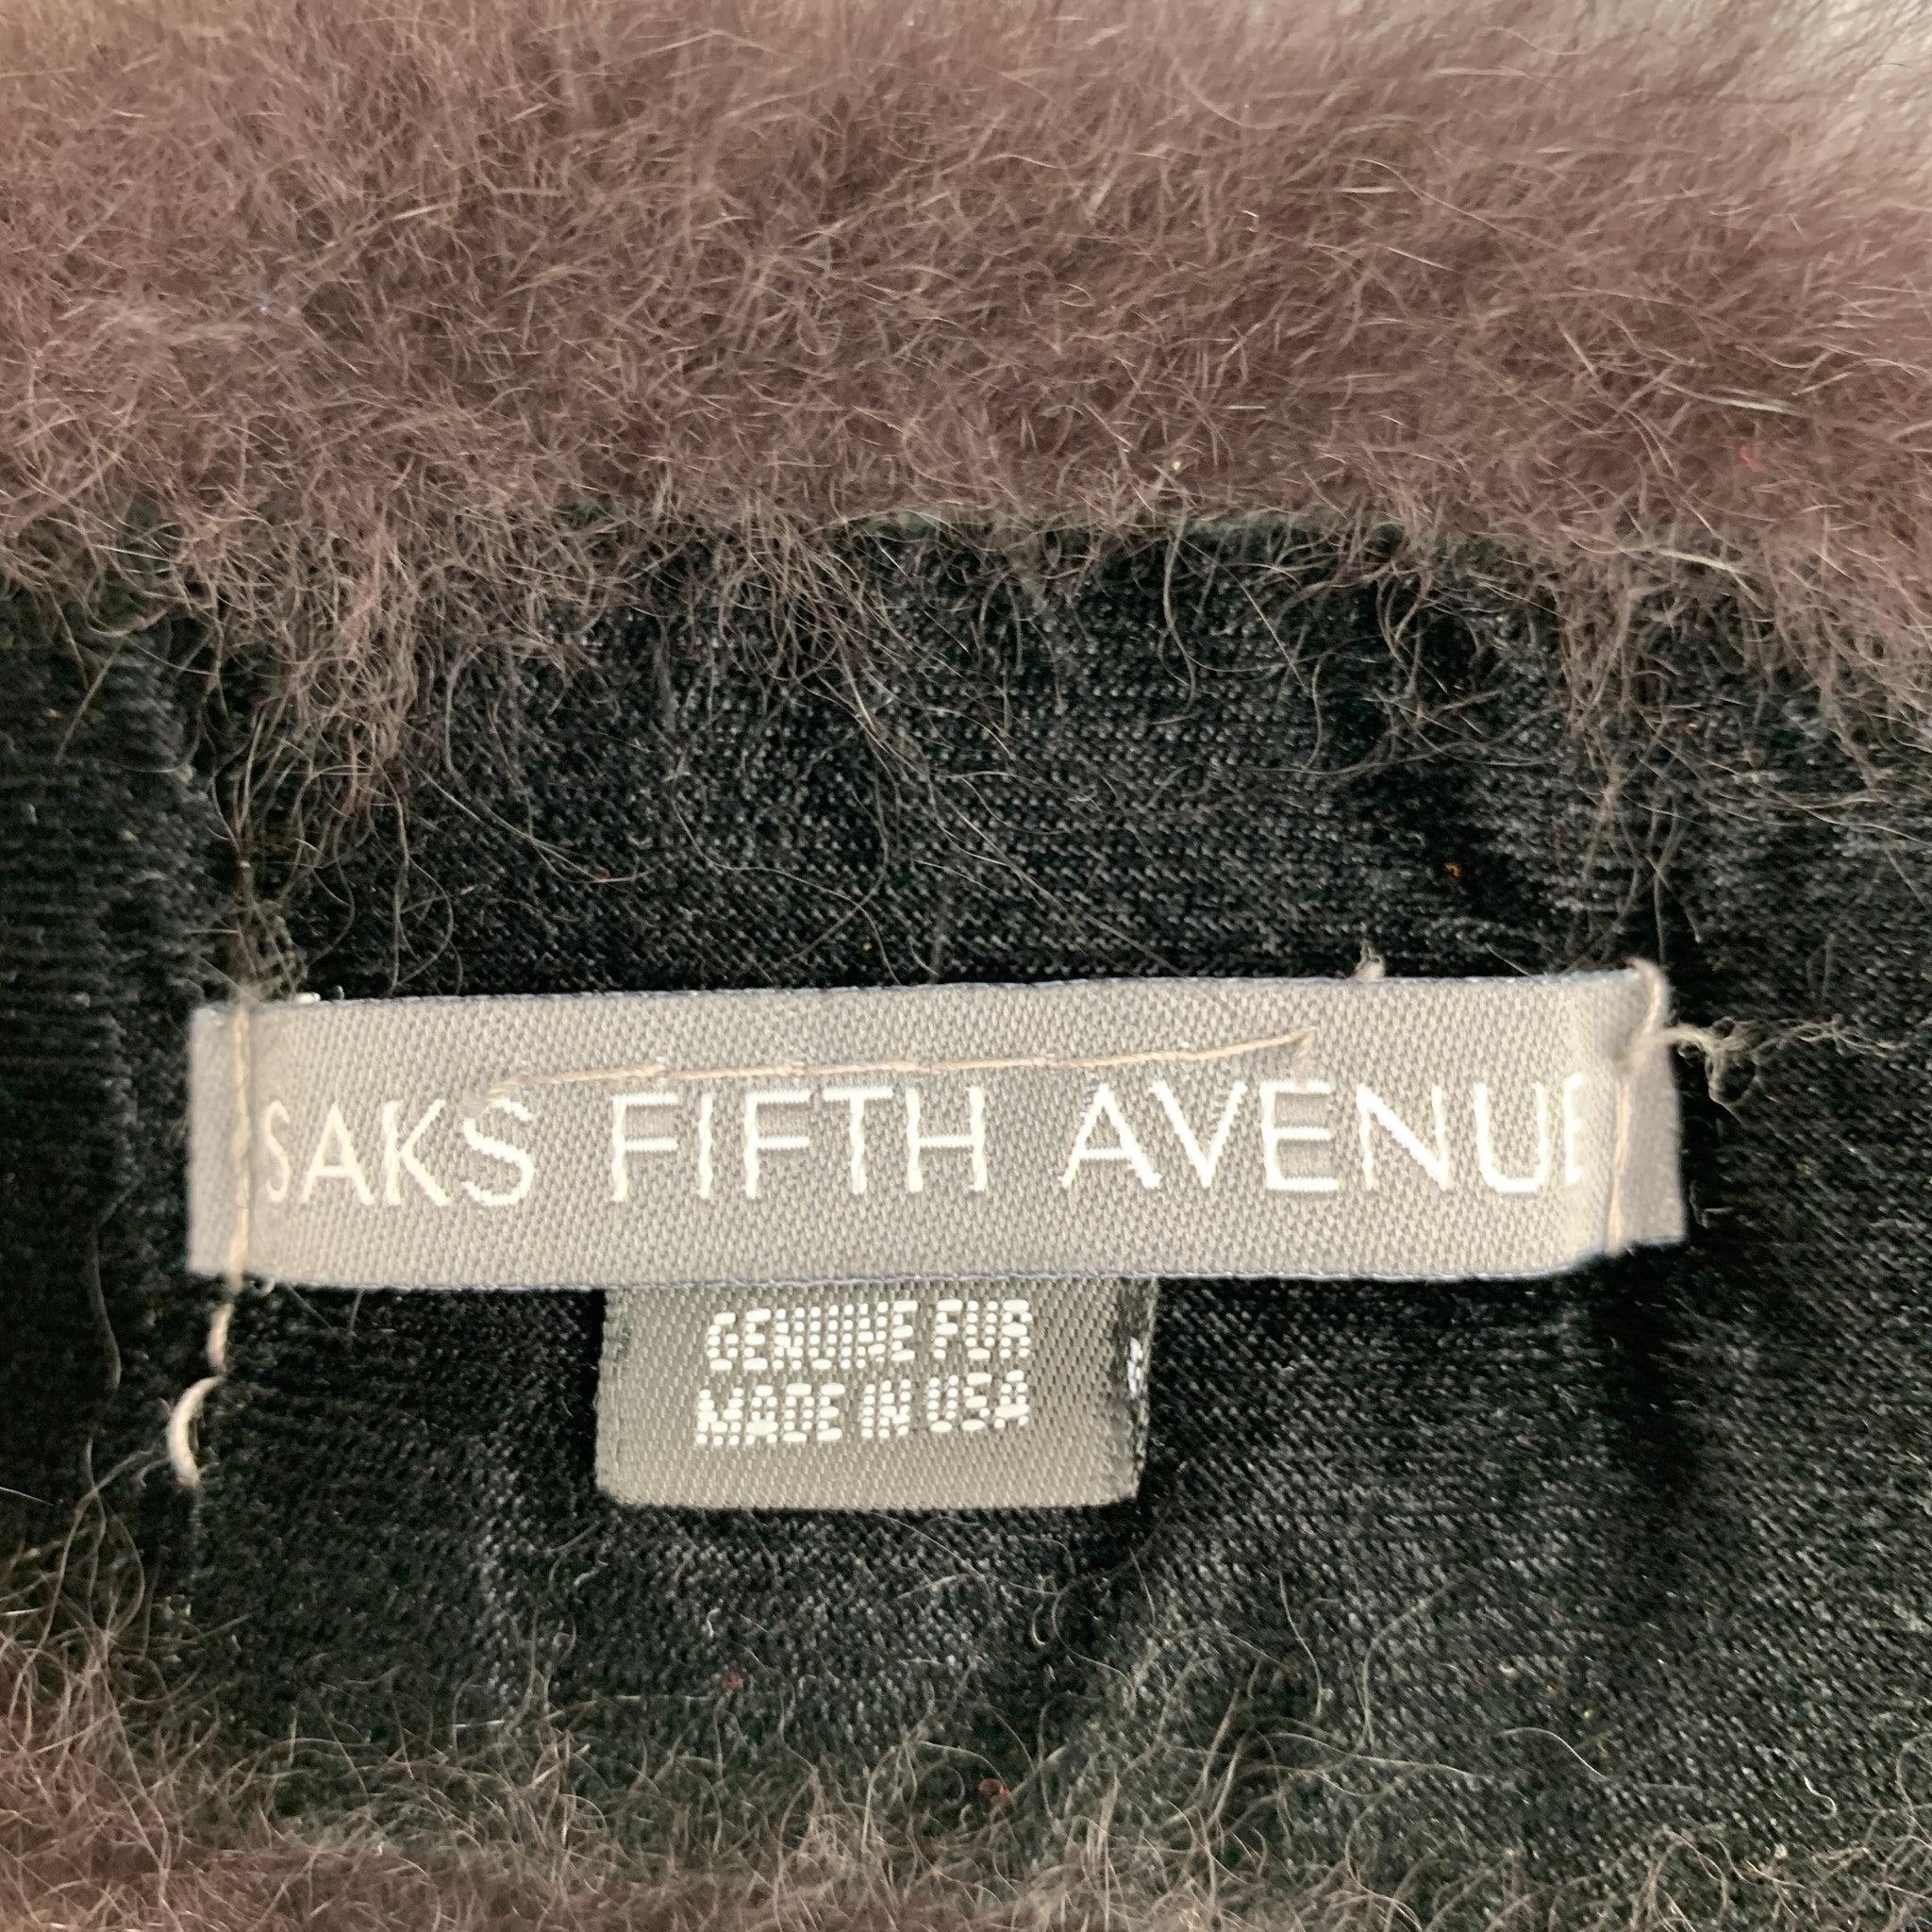 SAKS FIFTH AVENUE
neck scarf in a brown fur fabric.Very Good Pre-Owned Condition. 

Measurements: 
  24 inches  x 5 inches 
  
  
 
Reference: 126556
Category: Scarves & Shawls
More Details
    
Brand:  SAKS FIFTH AVENUE
Color:  Brown
Material: 